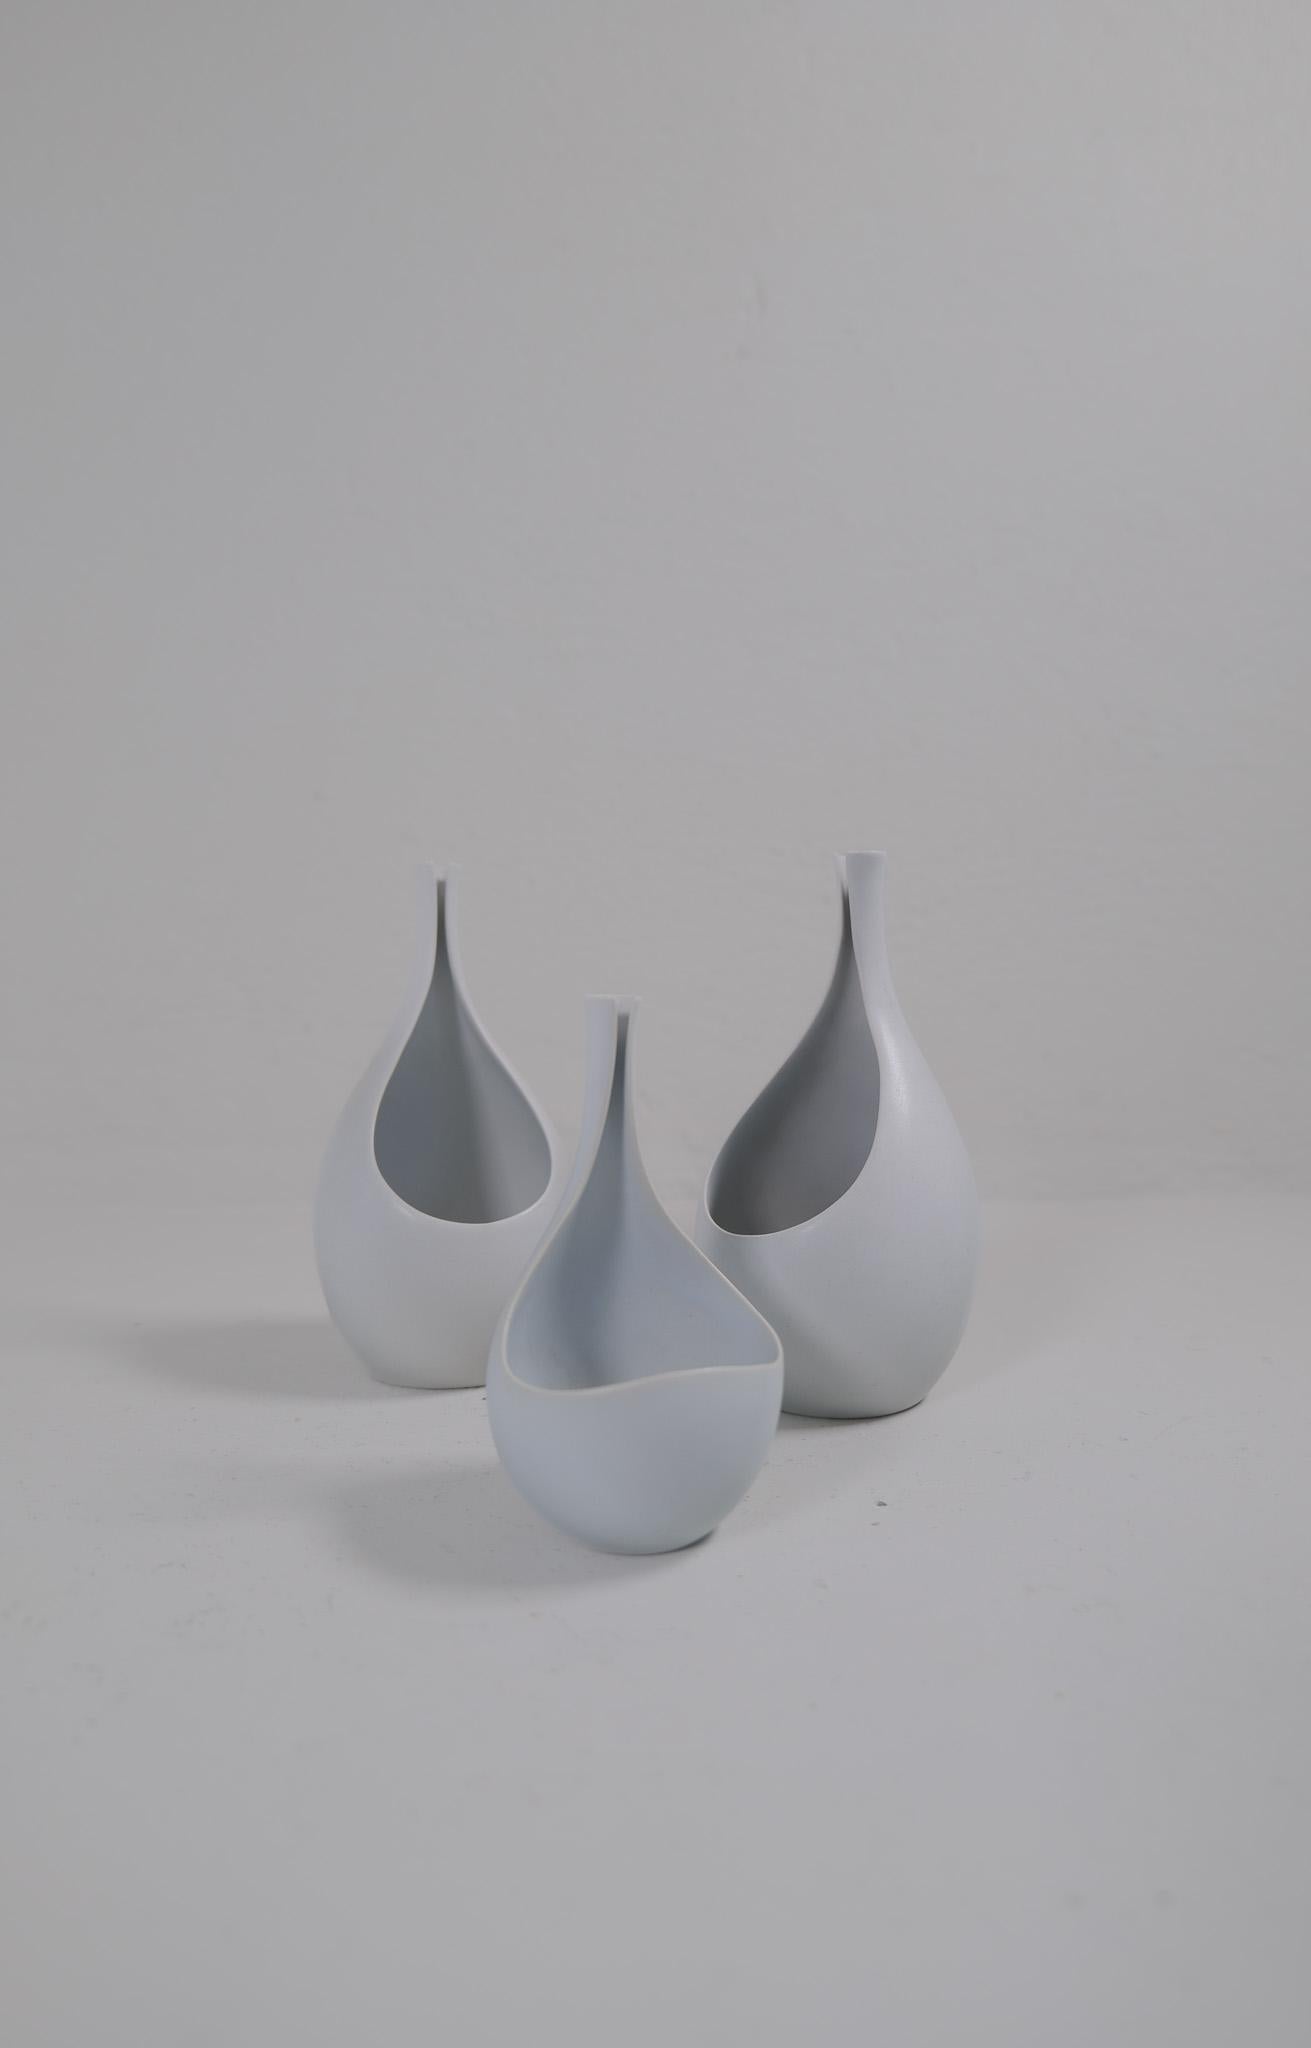 The pungo vase made in Sweden 1950s by the master Stig Lindberg for Gustavsberg. The pungo vase have the most beautiful form and with its matt white glaze this is a piece for many environments. Here is a collection of two large ones and one small.